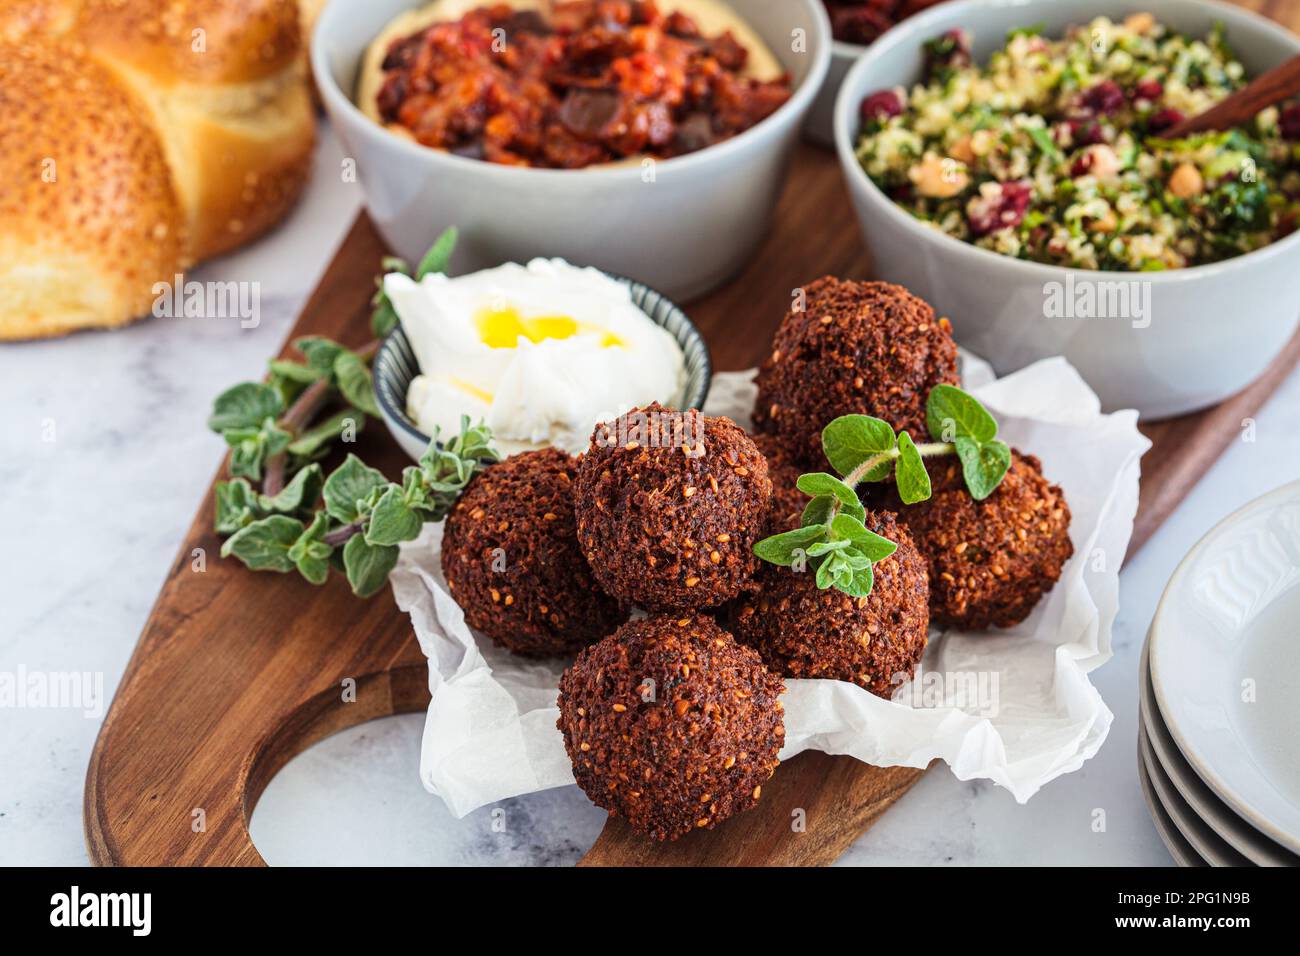 Falafel on a wooden party pletter. Israeli food concept. Stock Photo